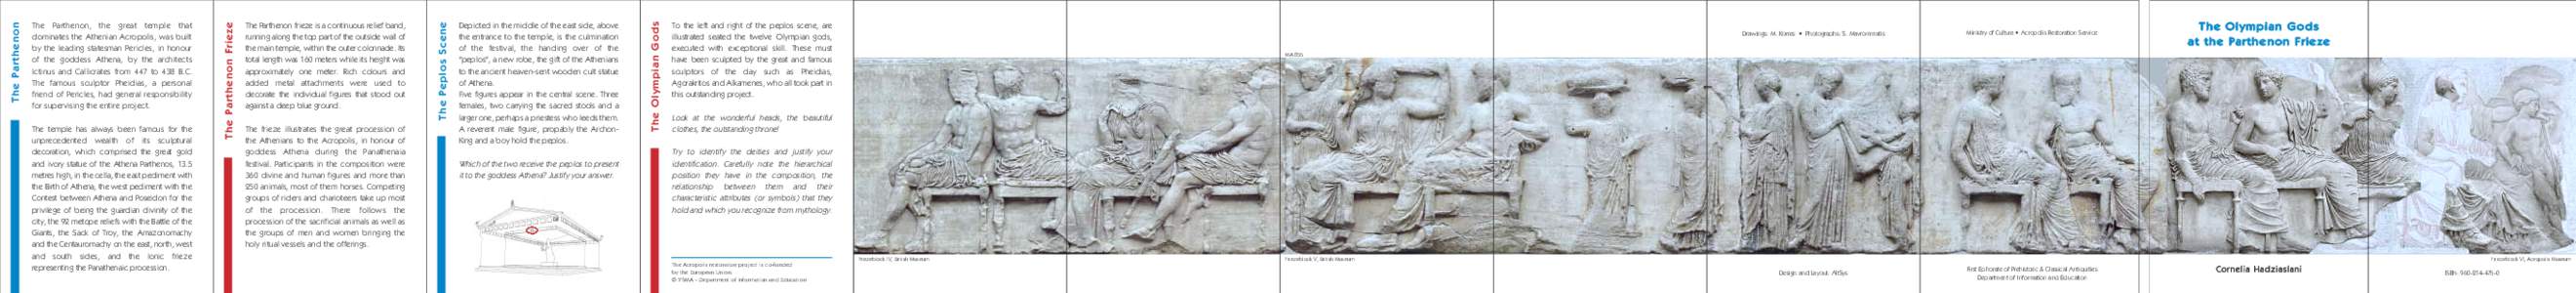 The frieze illustrates the great procession of the Athenians to the Acropolis, in honour of goddess Athena during the Panathenaia festival. Participants in the composition were 360 divine and human figures and more than 